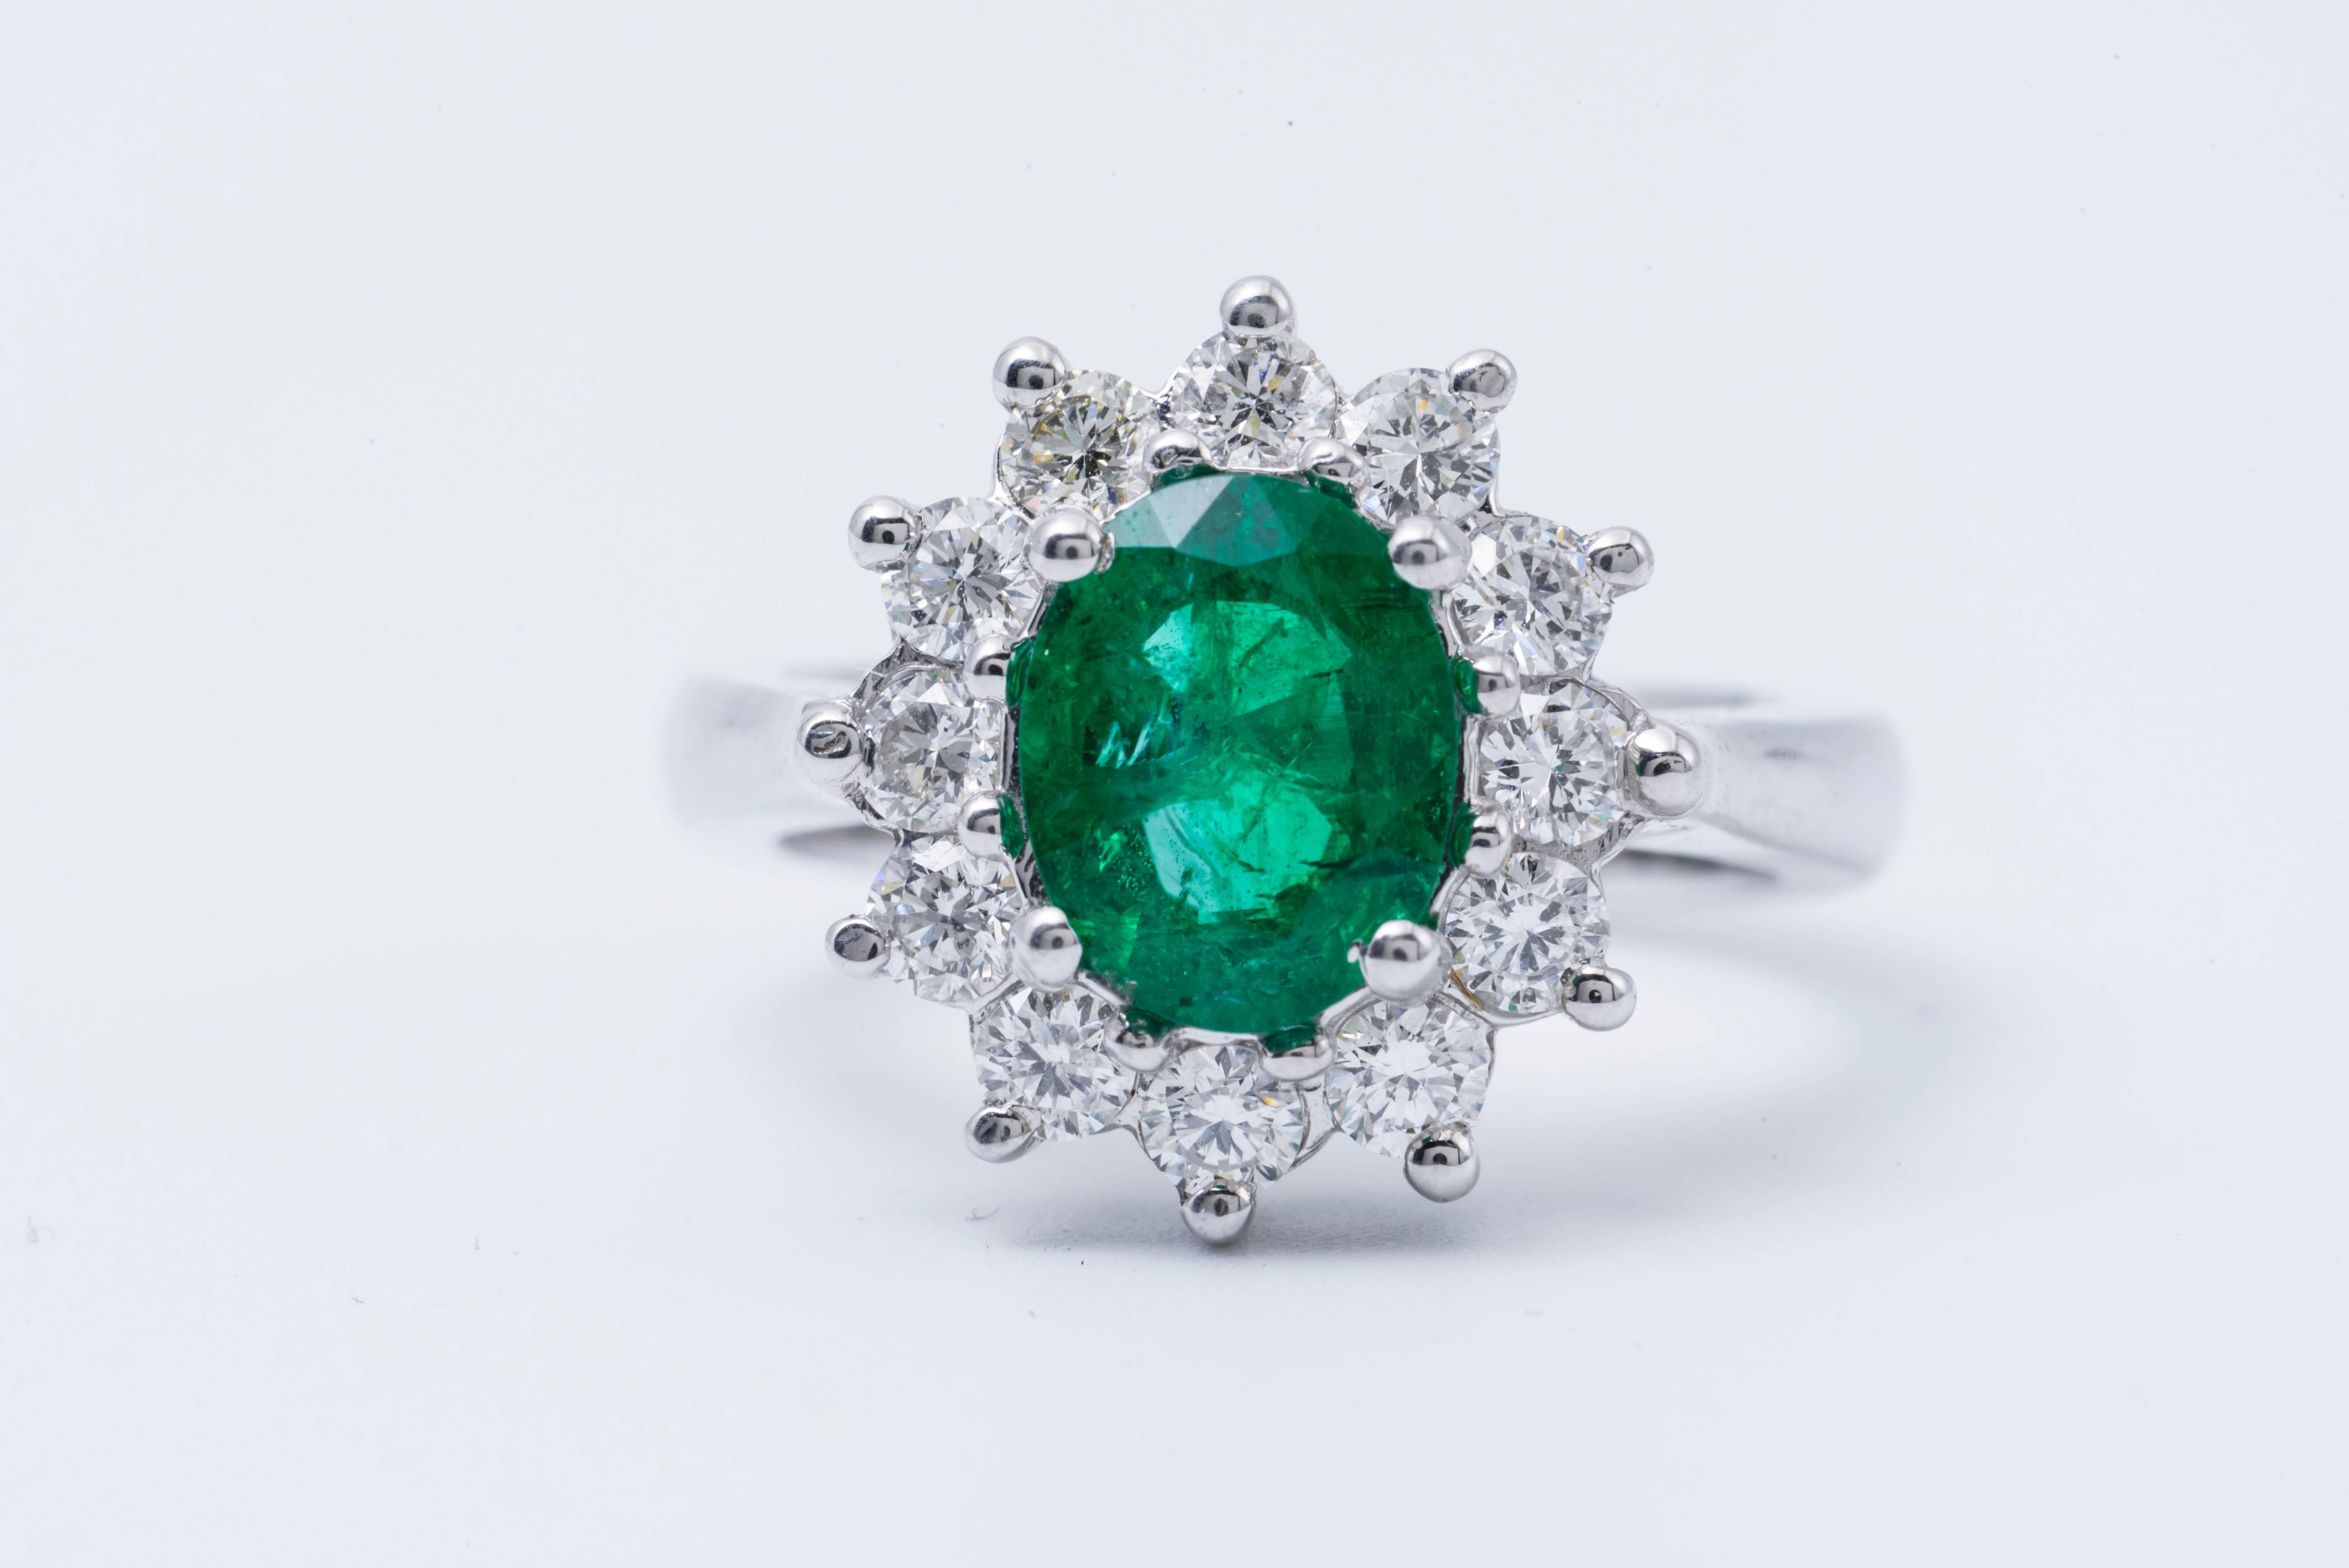 14 K white gold ring.
Emerald weight: 1.70 Carats  Size 9x7
Diamond Weight: 0.84 Cts.
its a classy timeless ring good for all your special occasions.All our Gemstones are genuine, and are sourced with the highest degree of integrity.
